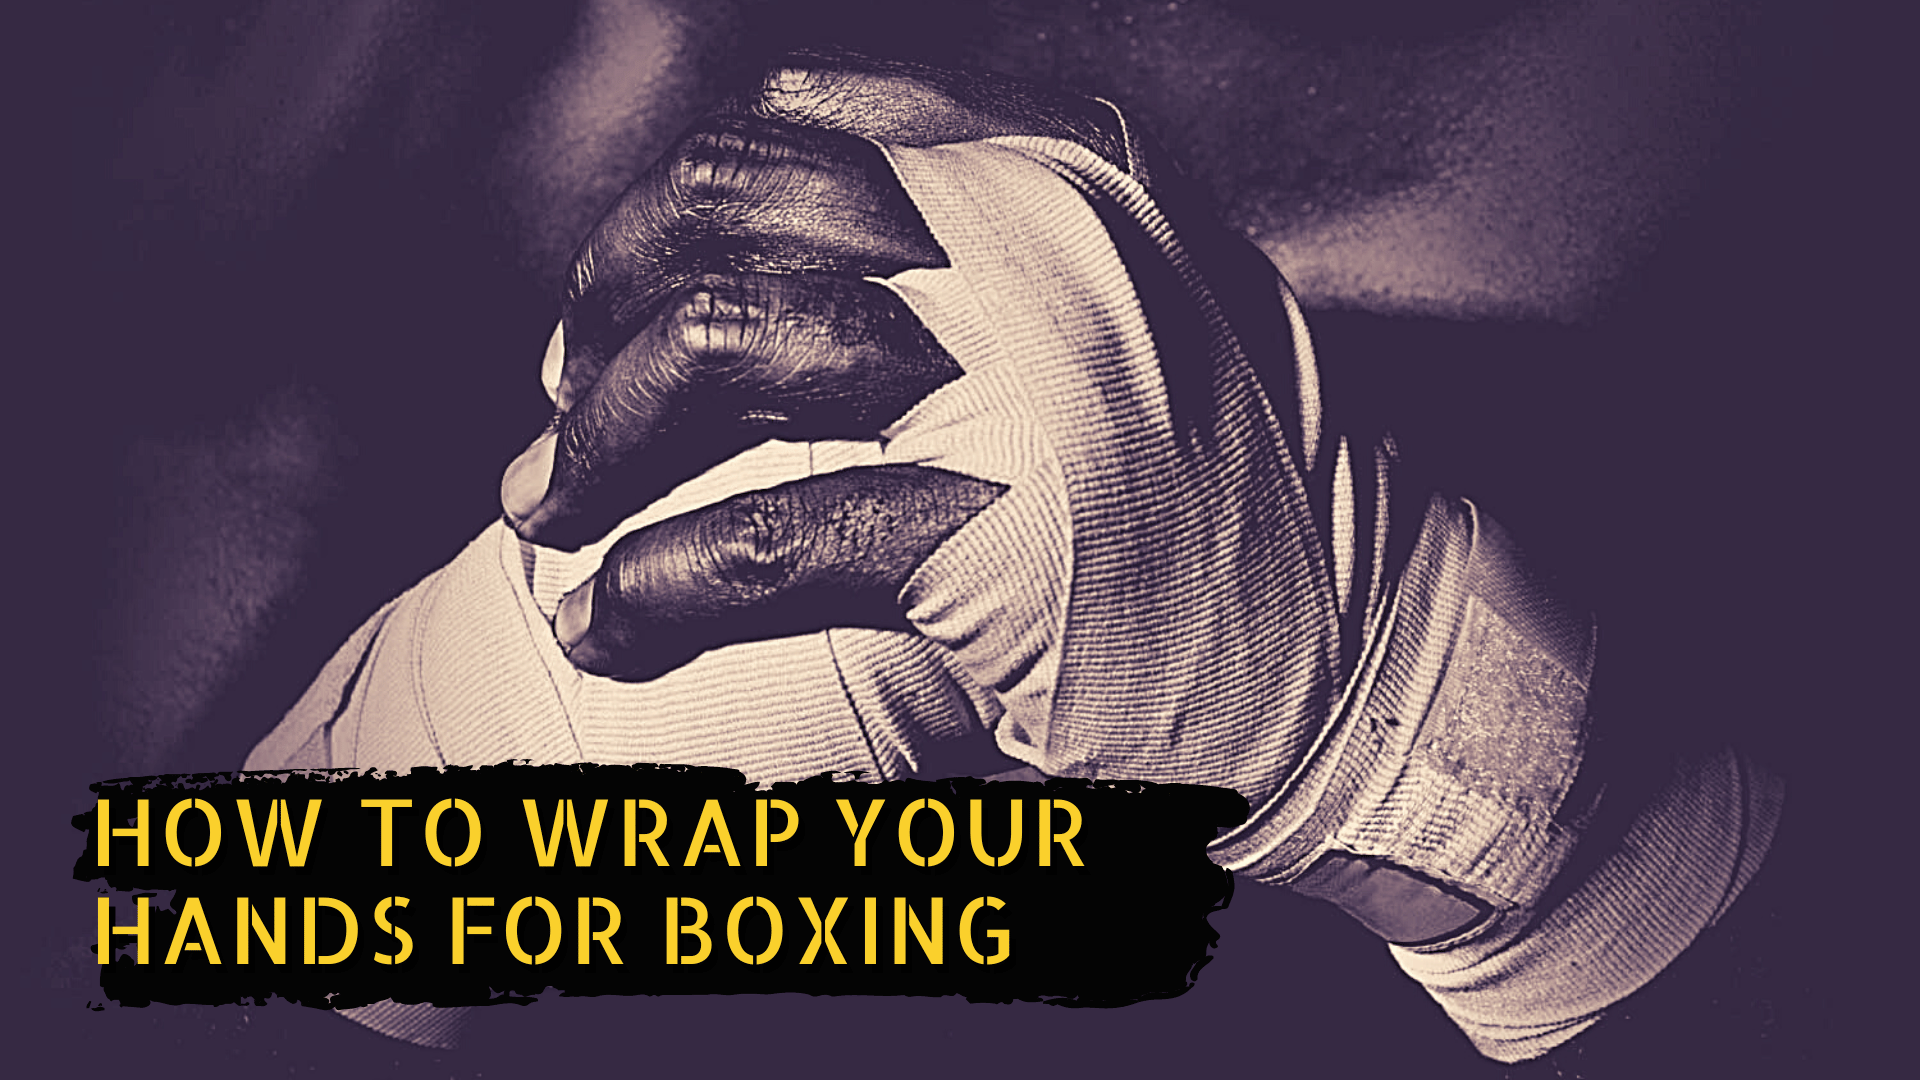 Hands wrapped up ready for boxing with the title "How to wrap hands for boxing"